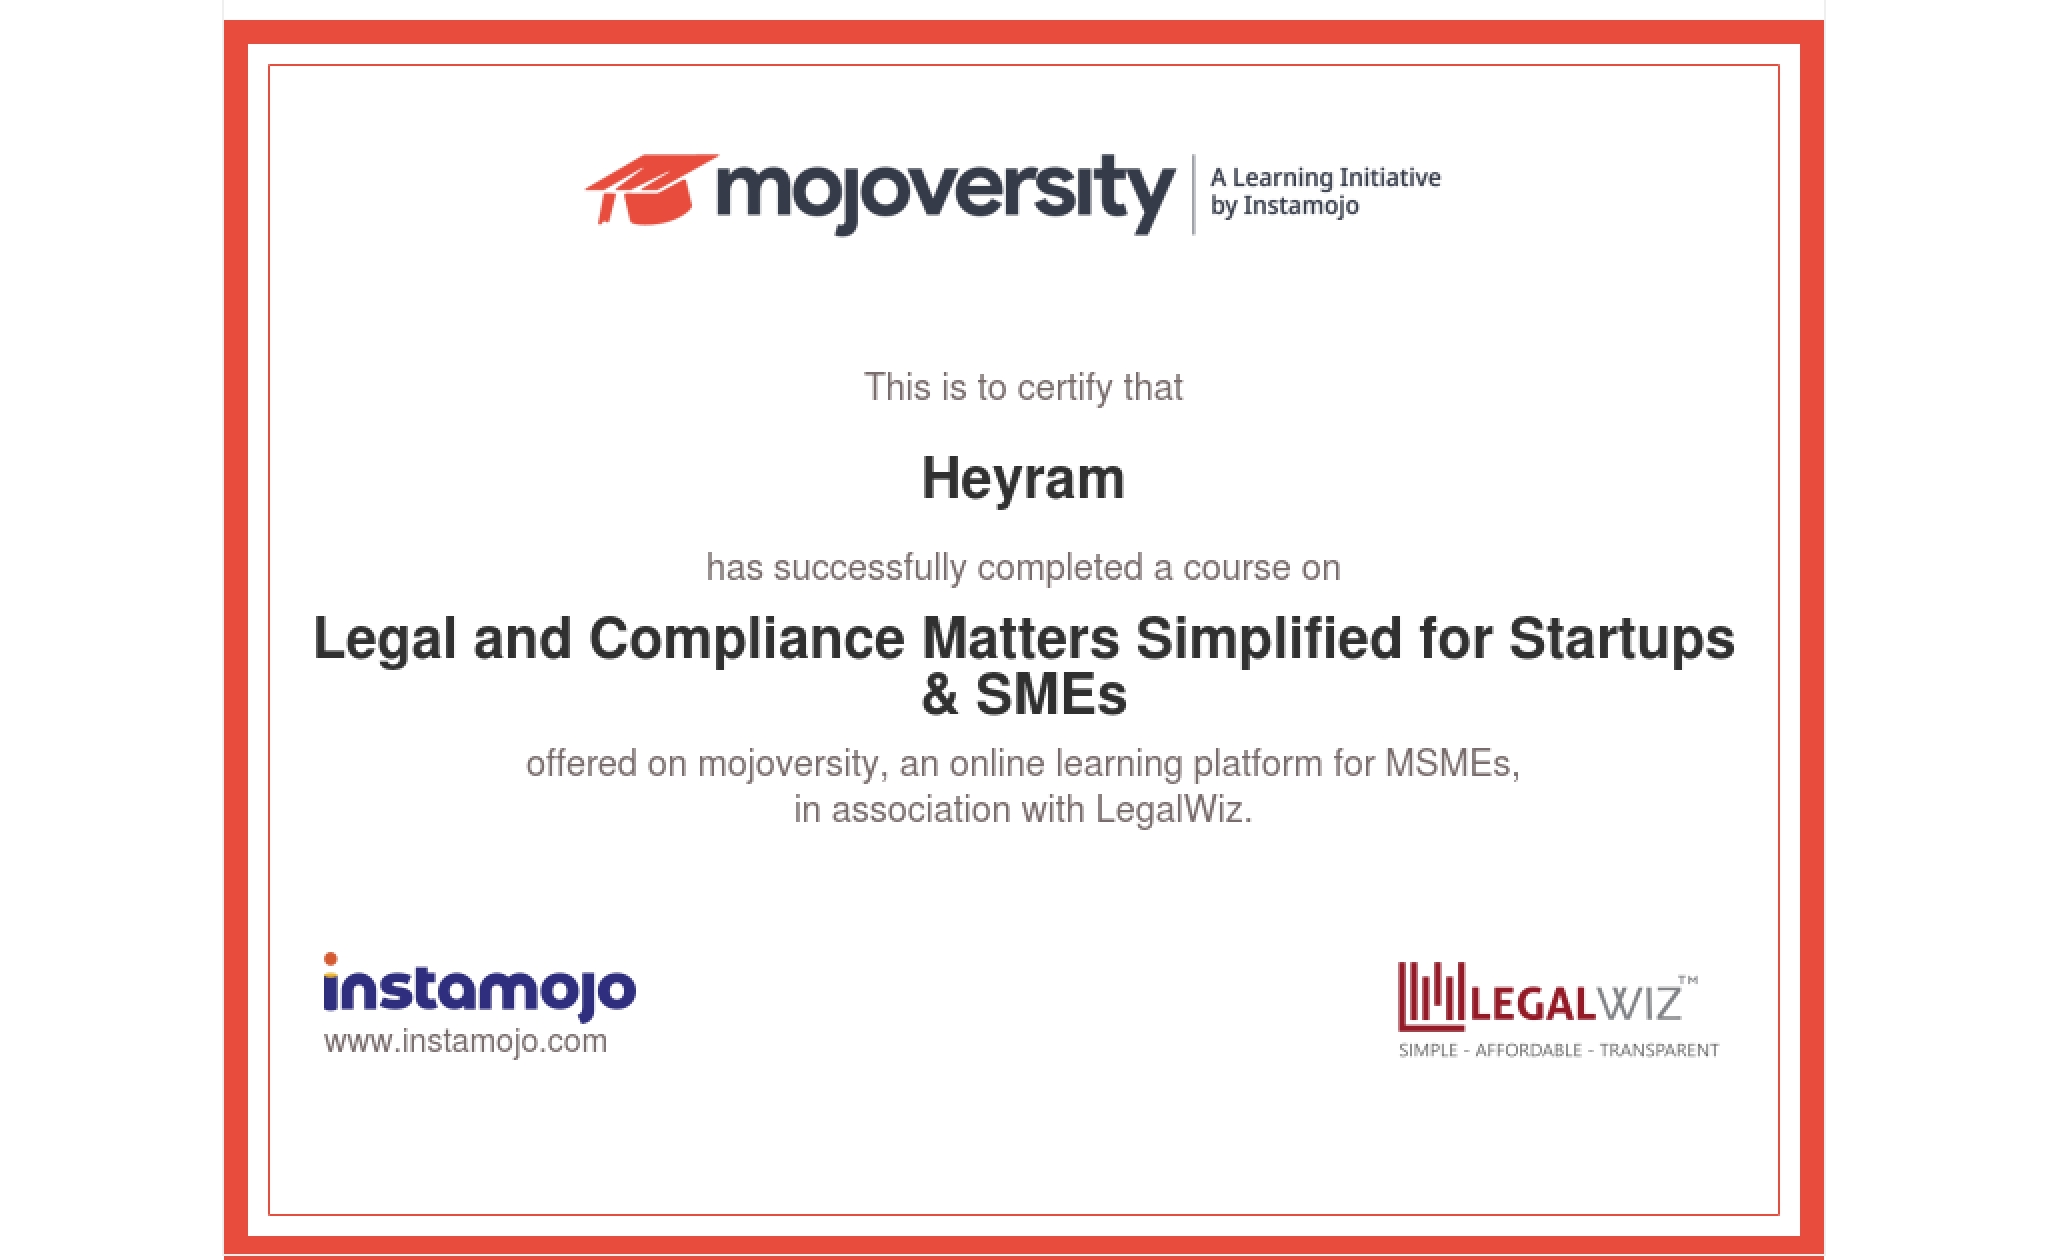 Legal and Compliance Matters Simplified for Startups & SMEs